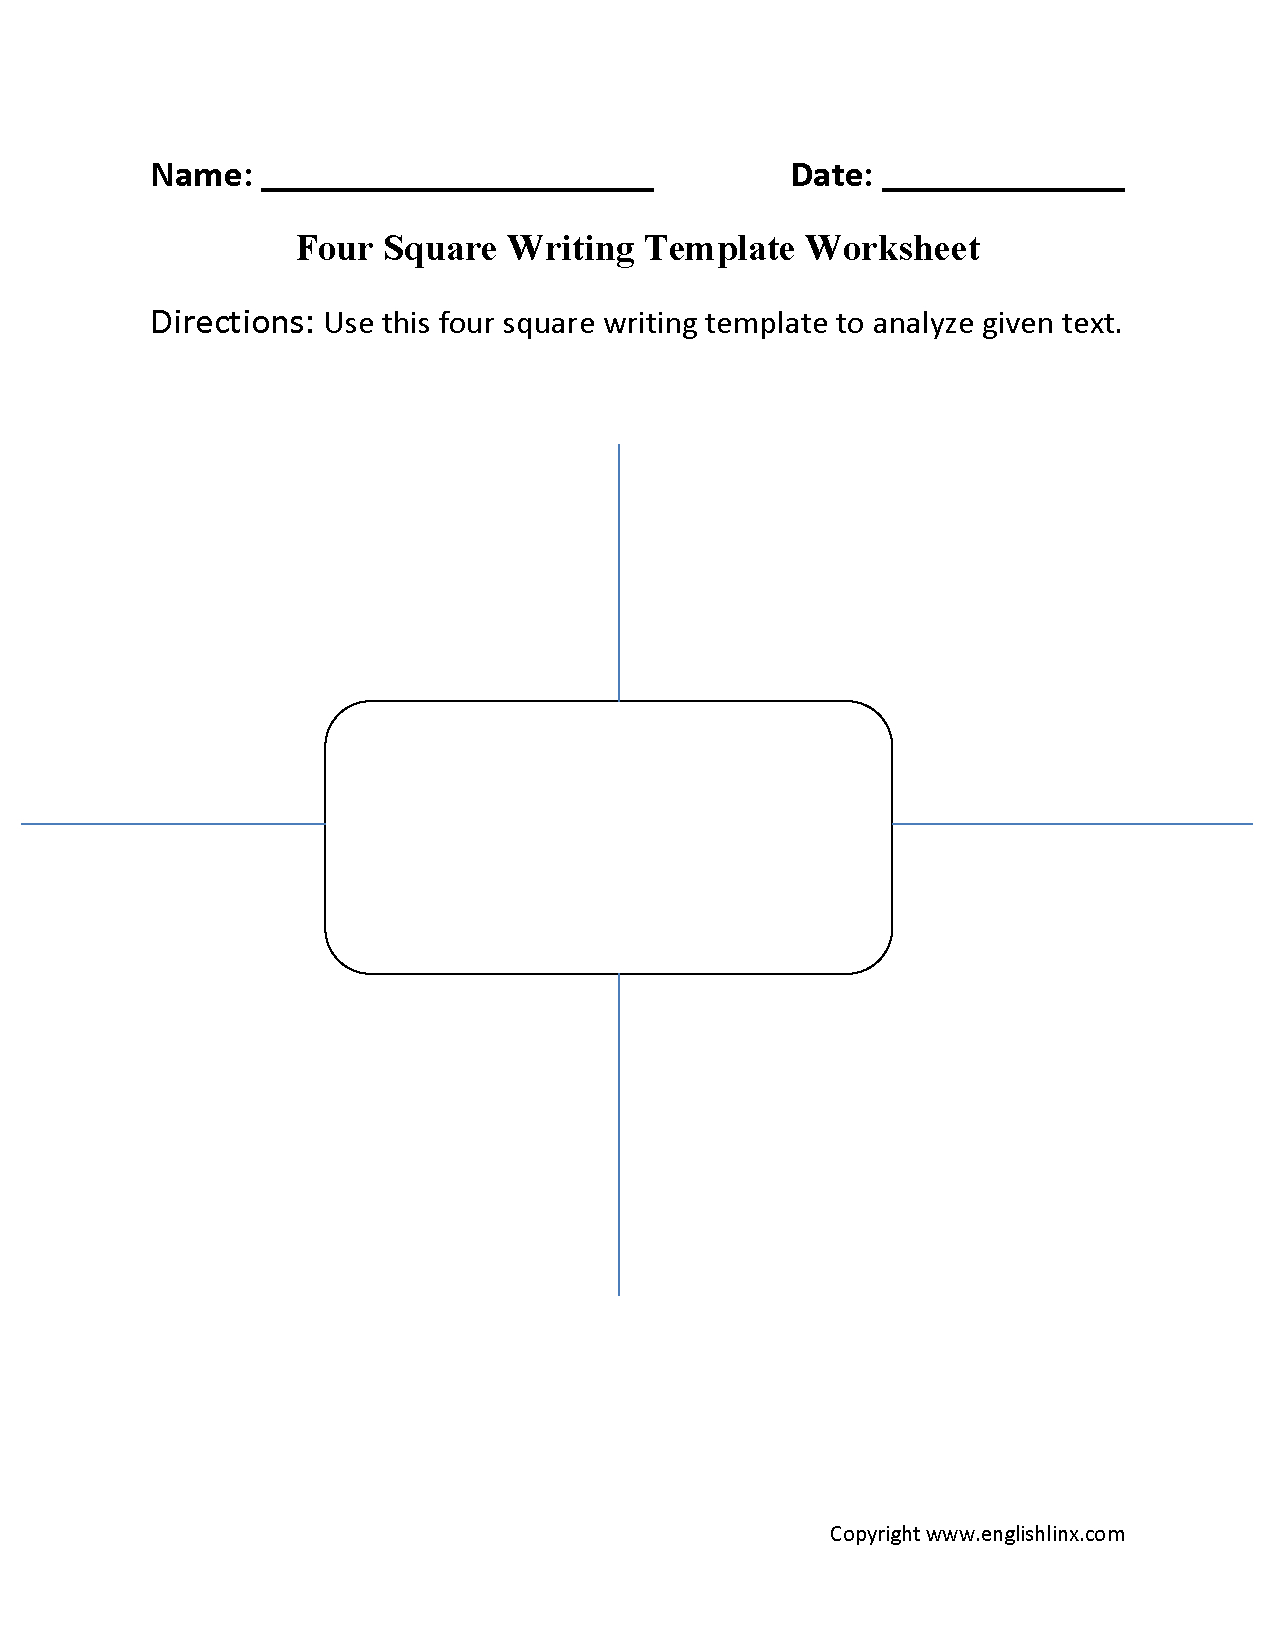 Writing Template Worksheets | Four Square Writing Template With Regard To Blank Four Square Writing Template